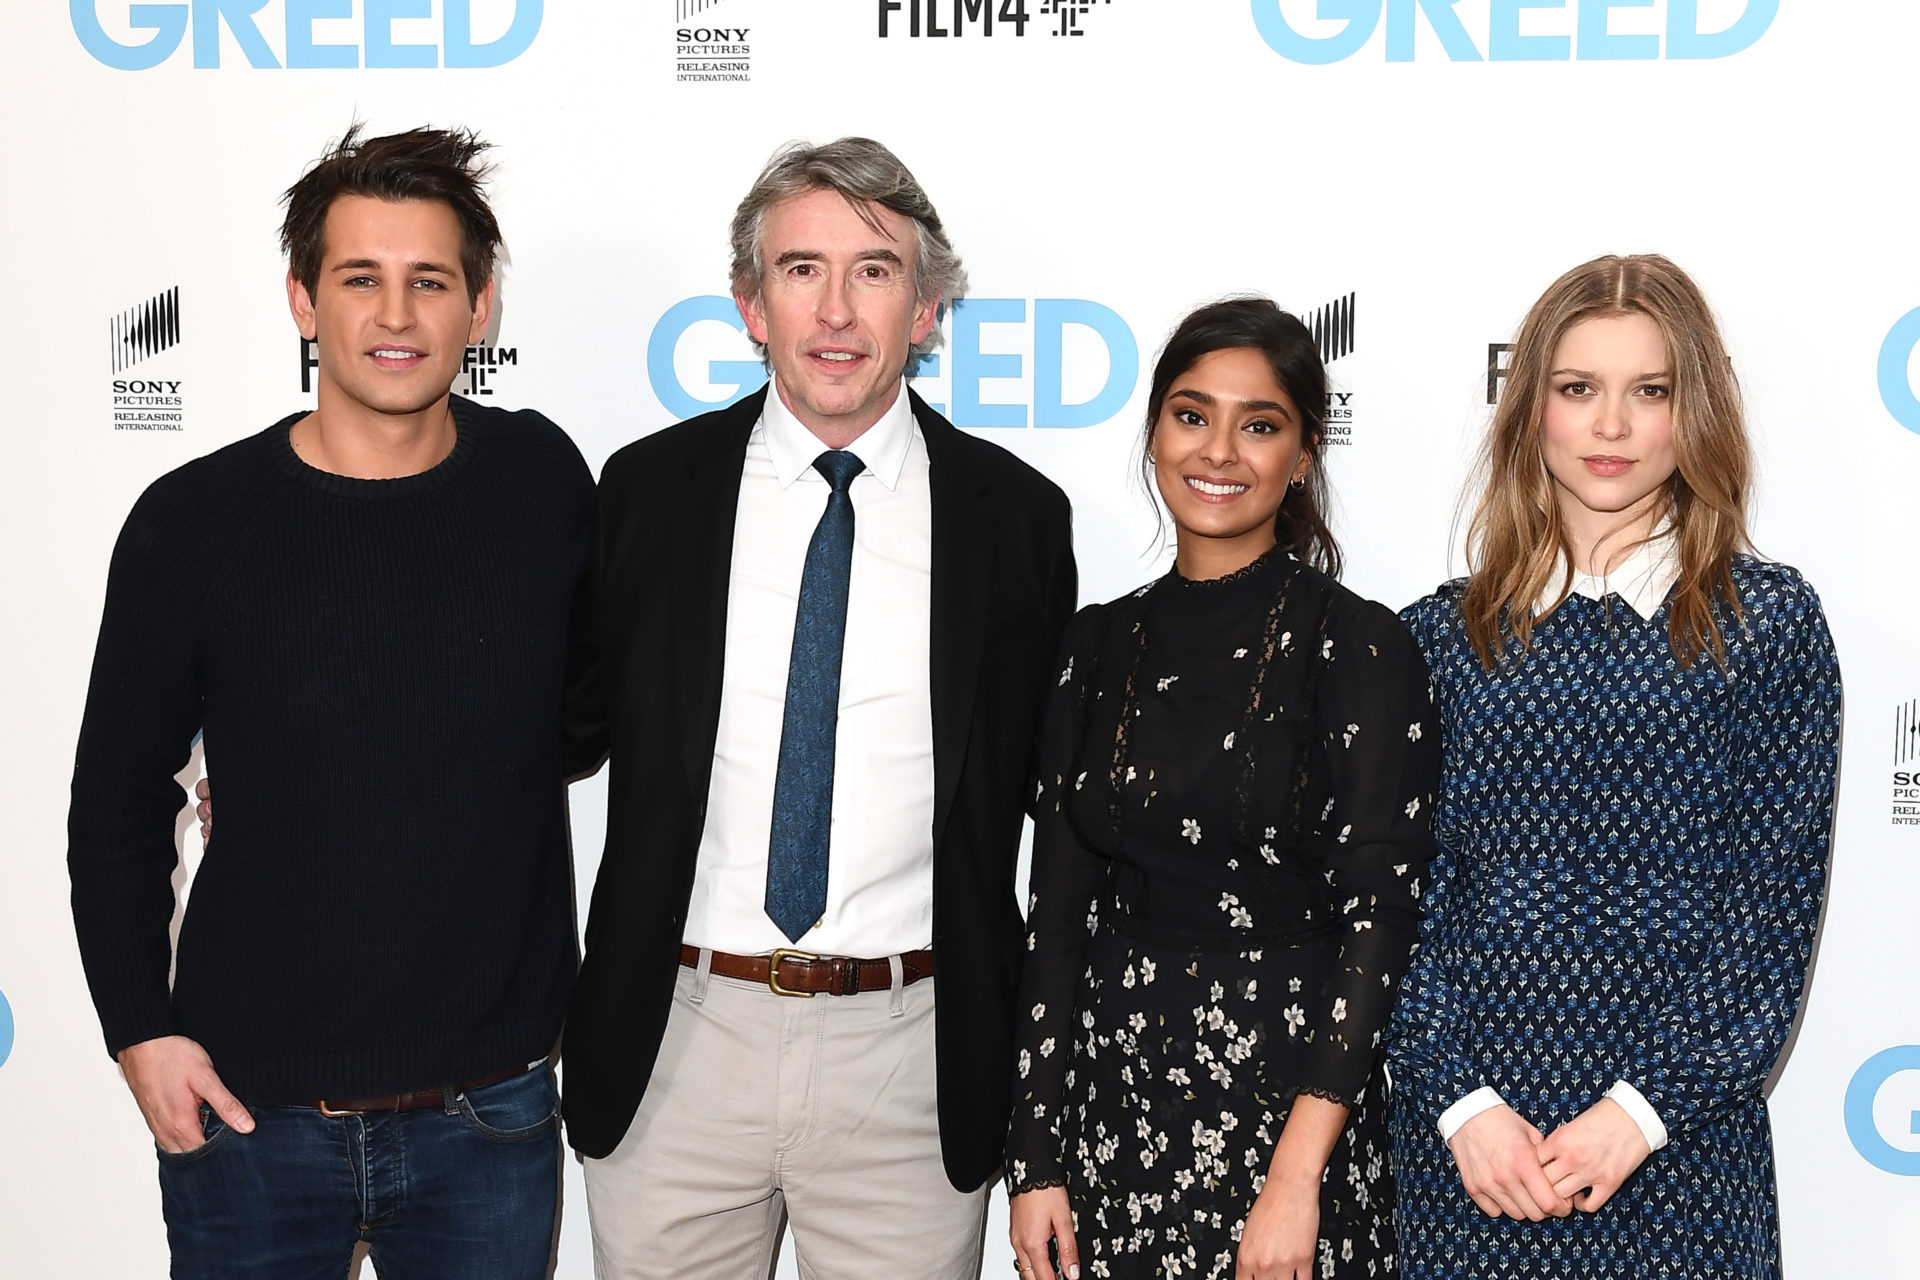 Ollie Locke, Steve Coogan, Dinita Gohil and Sophie Cookson attend "Greed" Special Screening at Ham Yard Hotel on February 13, 2020 in London, England. 